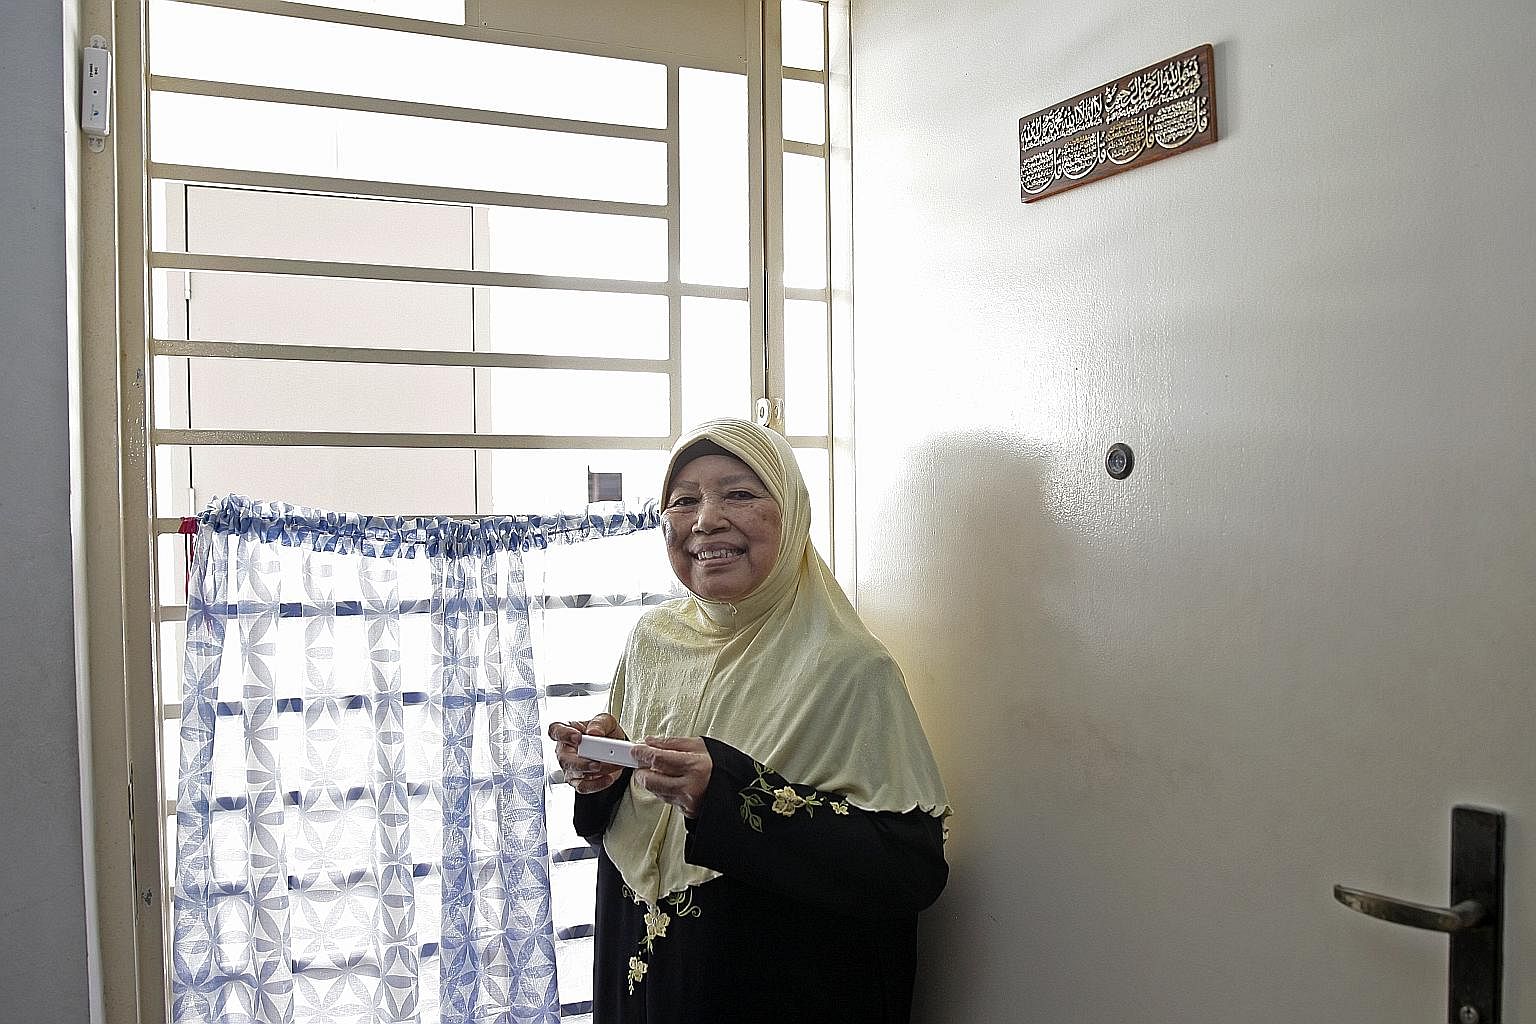 Madam Sitee Marnoor with a door sensor. A similar one was mounted on the frame of her main door in September. Since then, it has sent out three alerts.